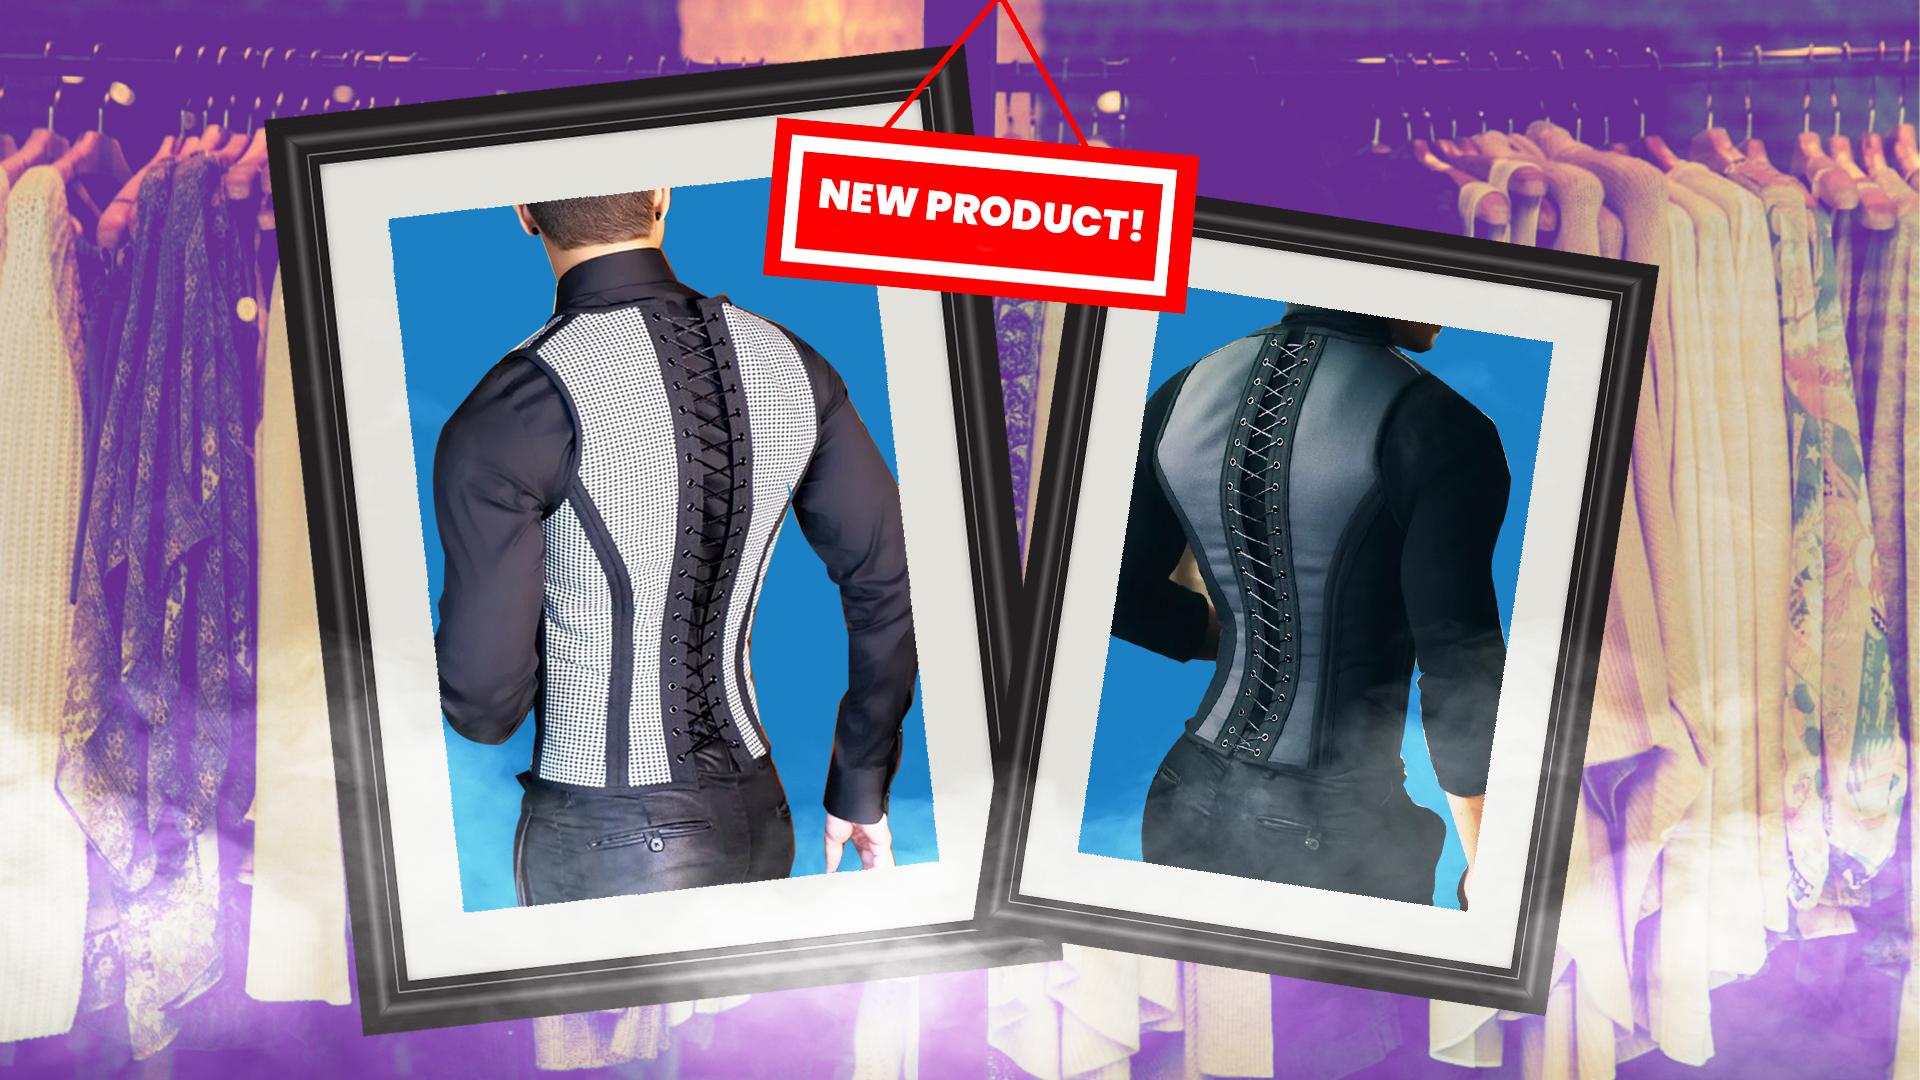 This company sells a variety of corsets for men who want to achieve an ‘hourglass figure’